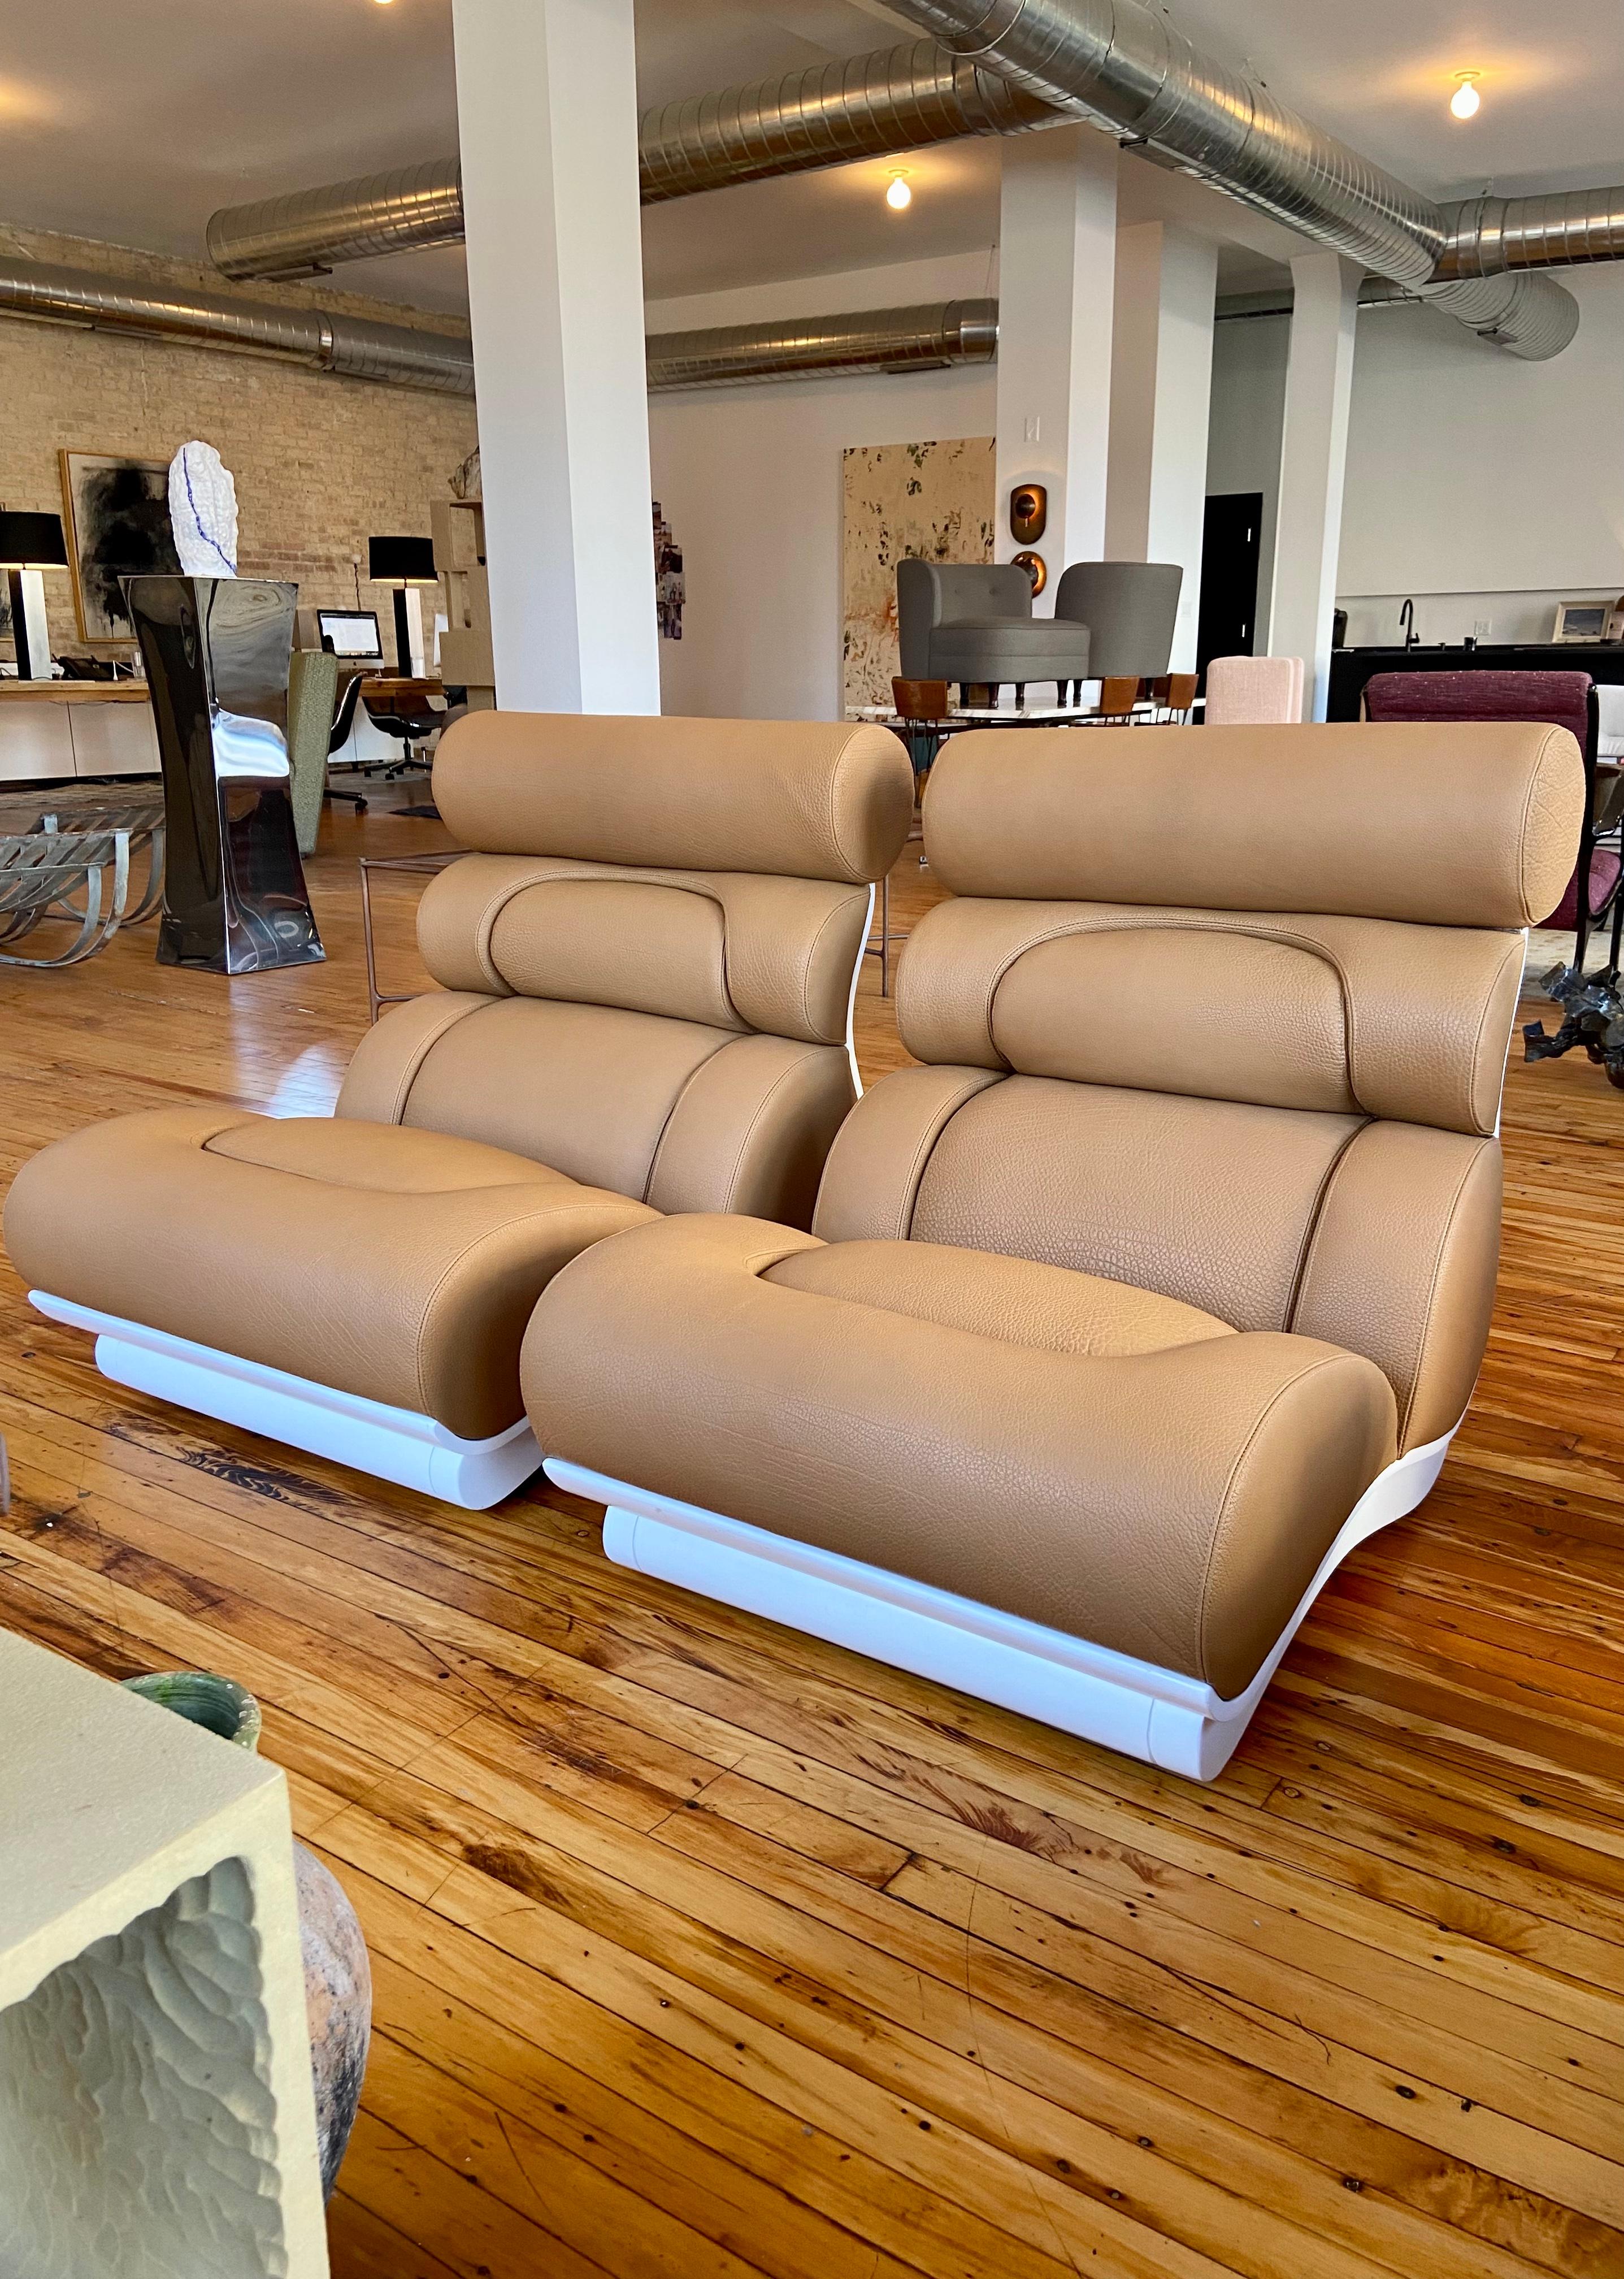 Space Age Raphael Raffel 1960s Brown Leather Futurist Lounge Chairs Pair For Sale